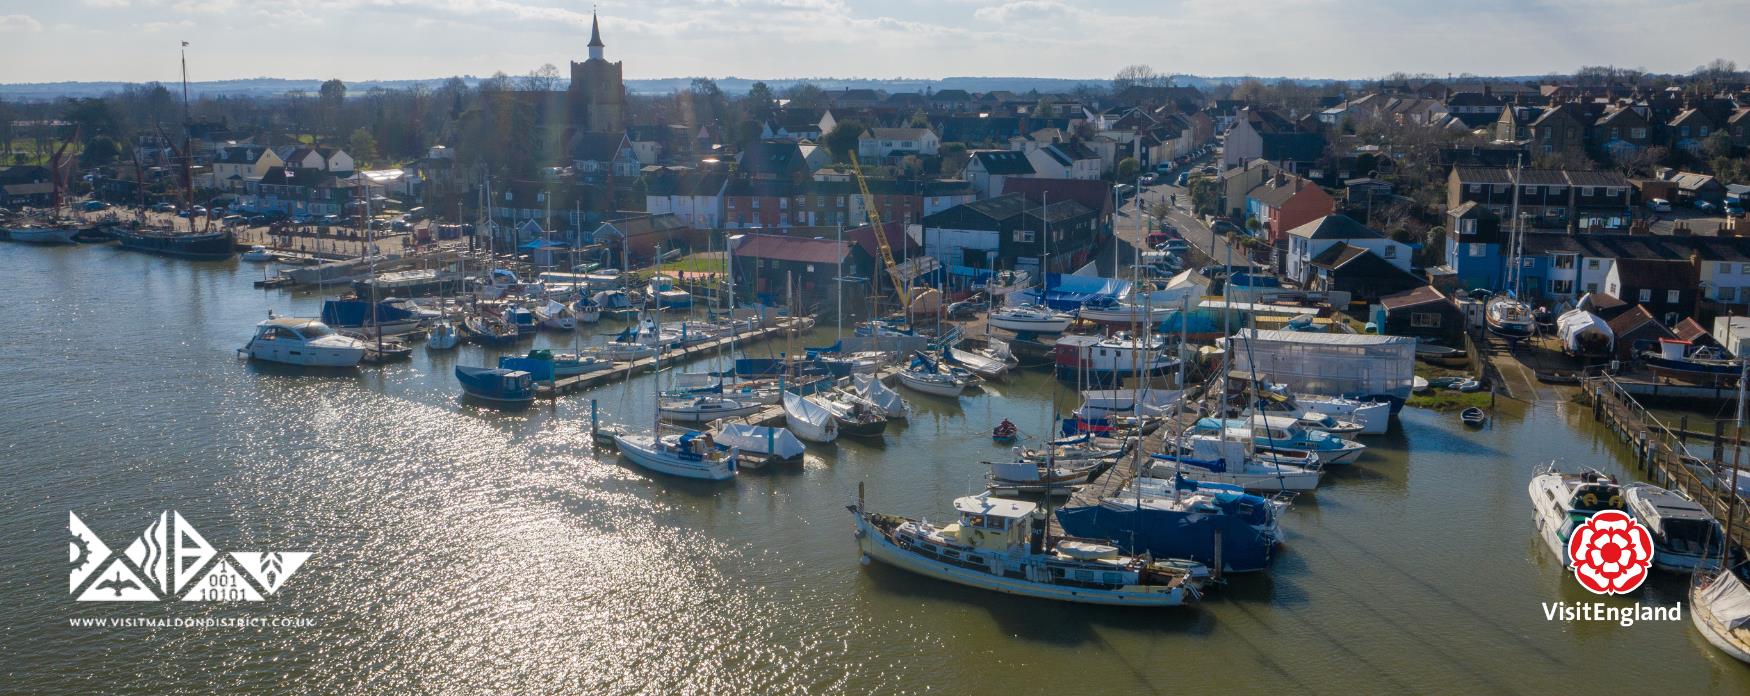 Hythe Quay from above